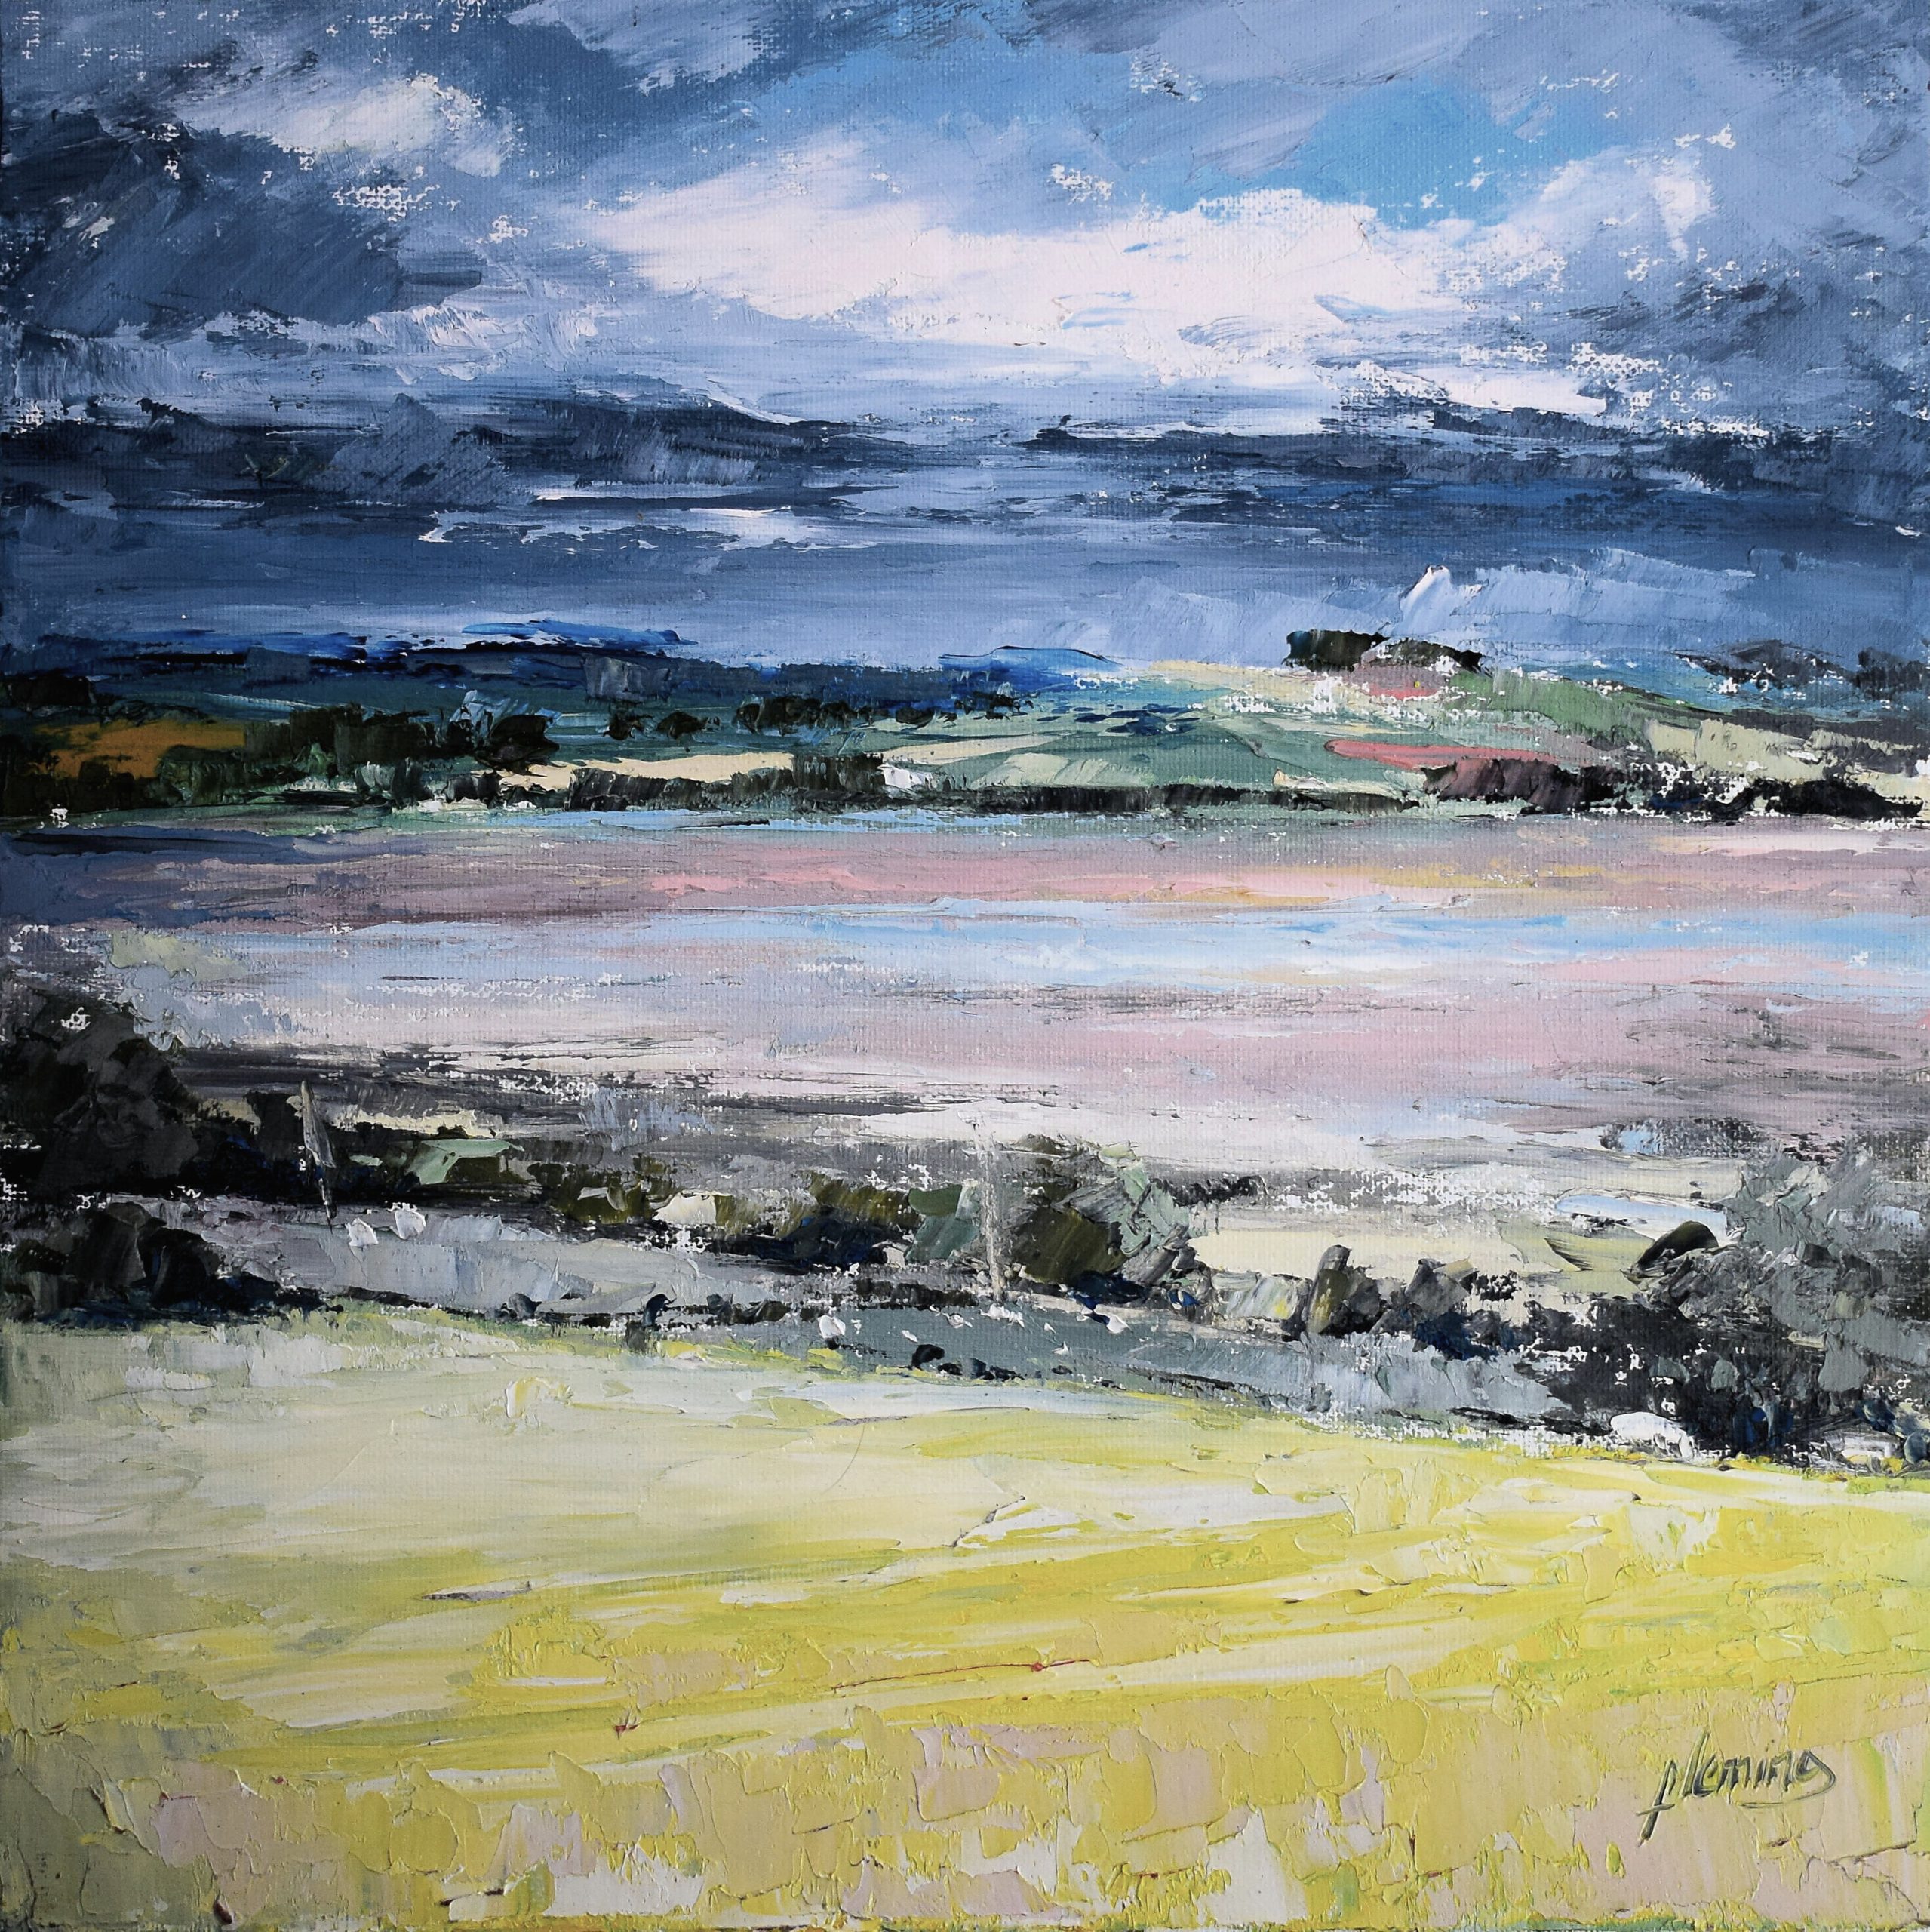 7.Late Summer, Sidlaw Hills & Firth of Tay from North Fife - ver. 2